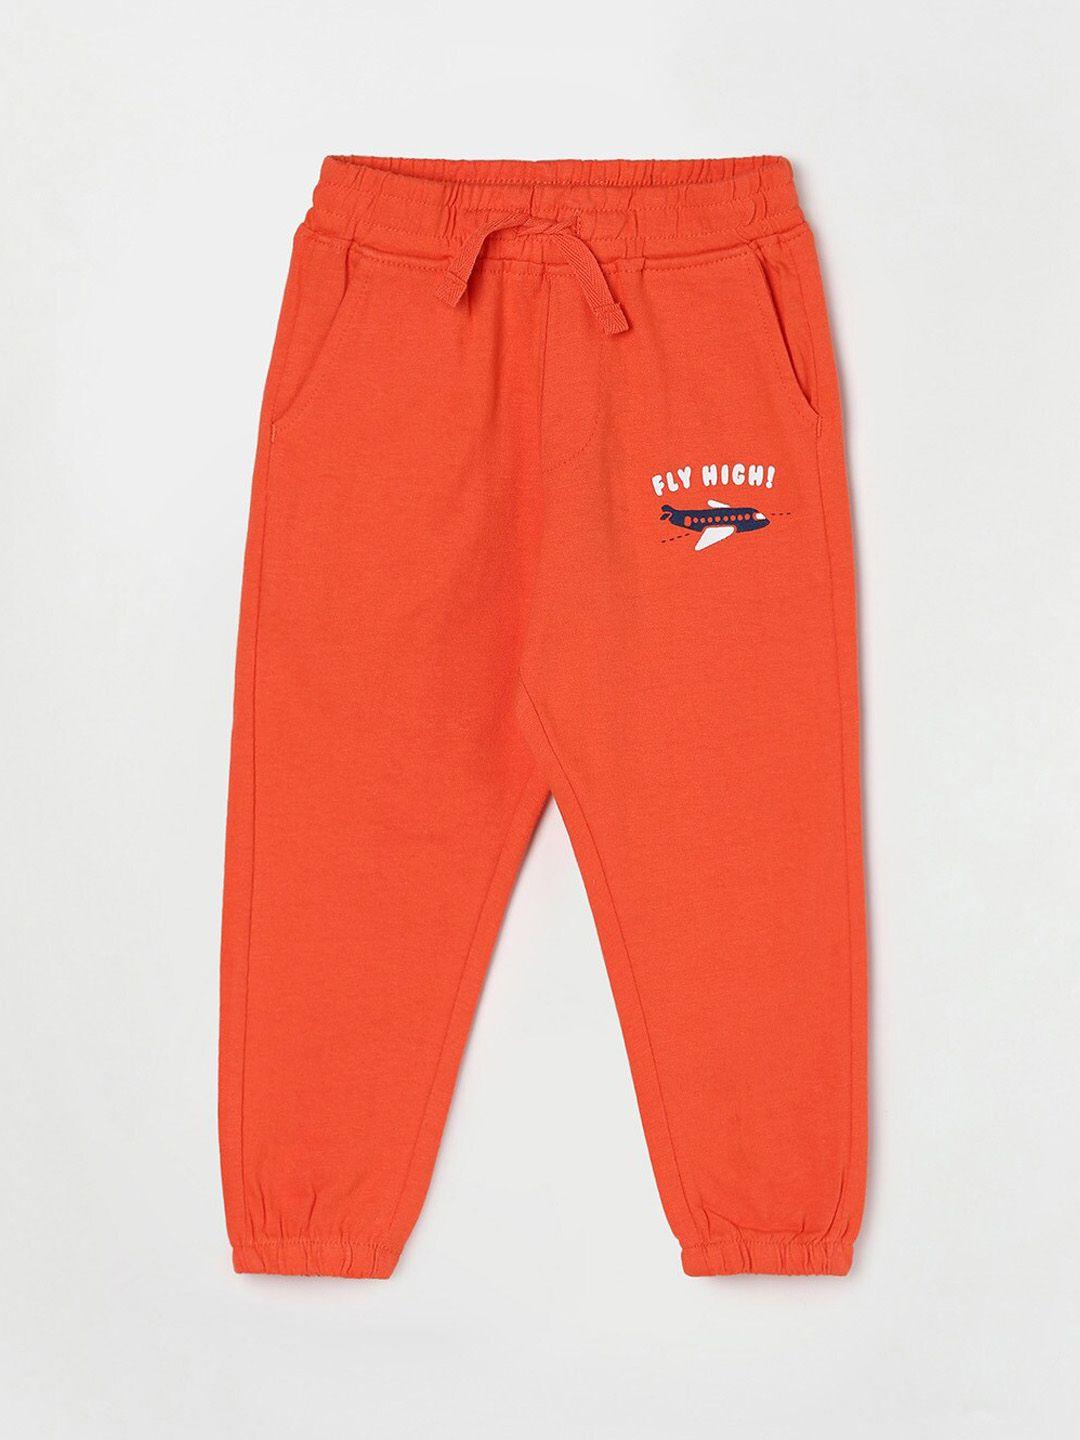 Juniors by Lifestyle Boys Cotton Joggers